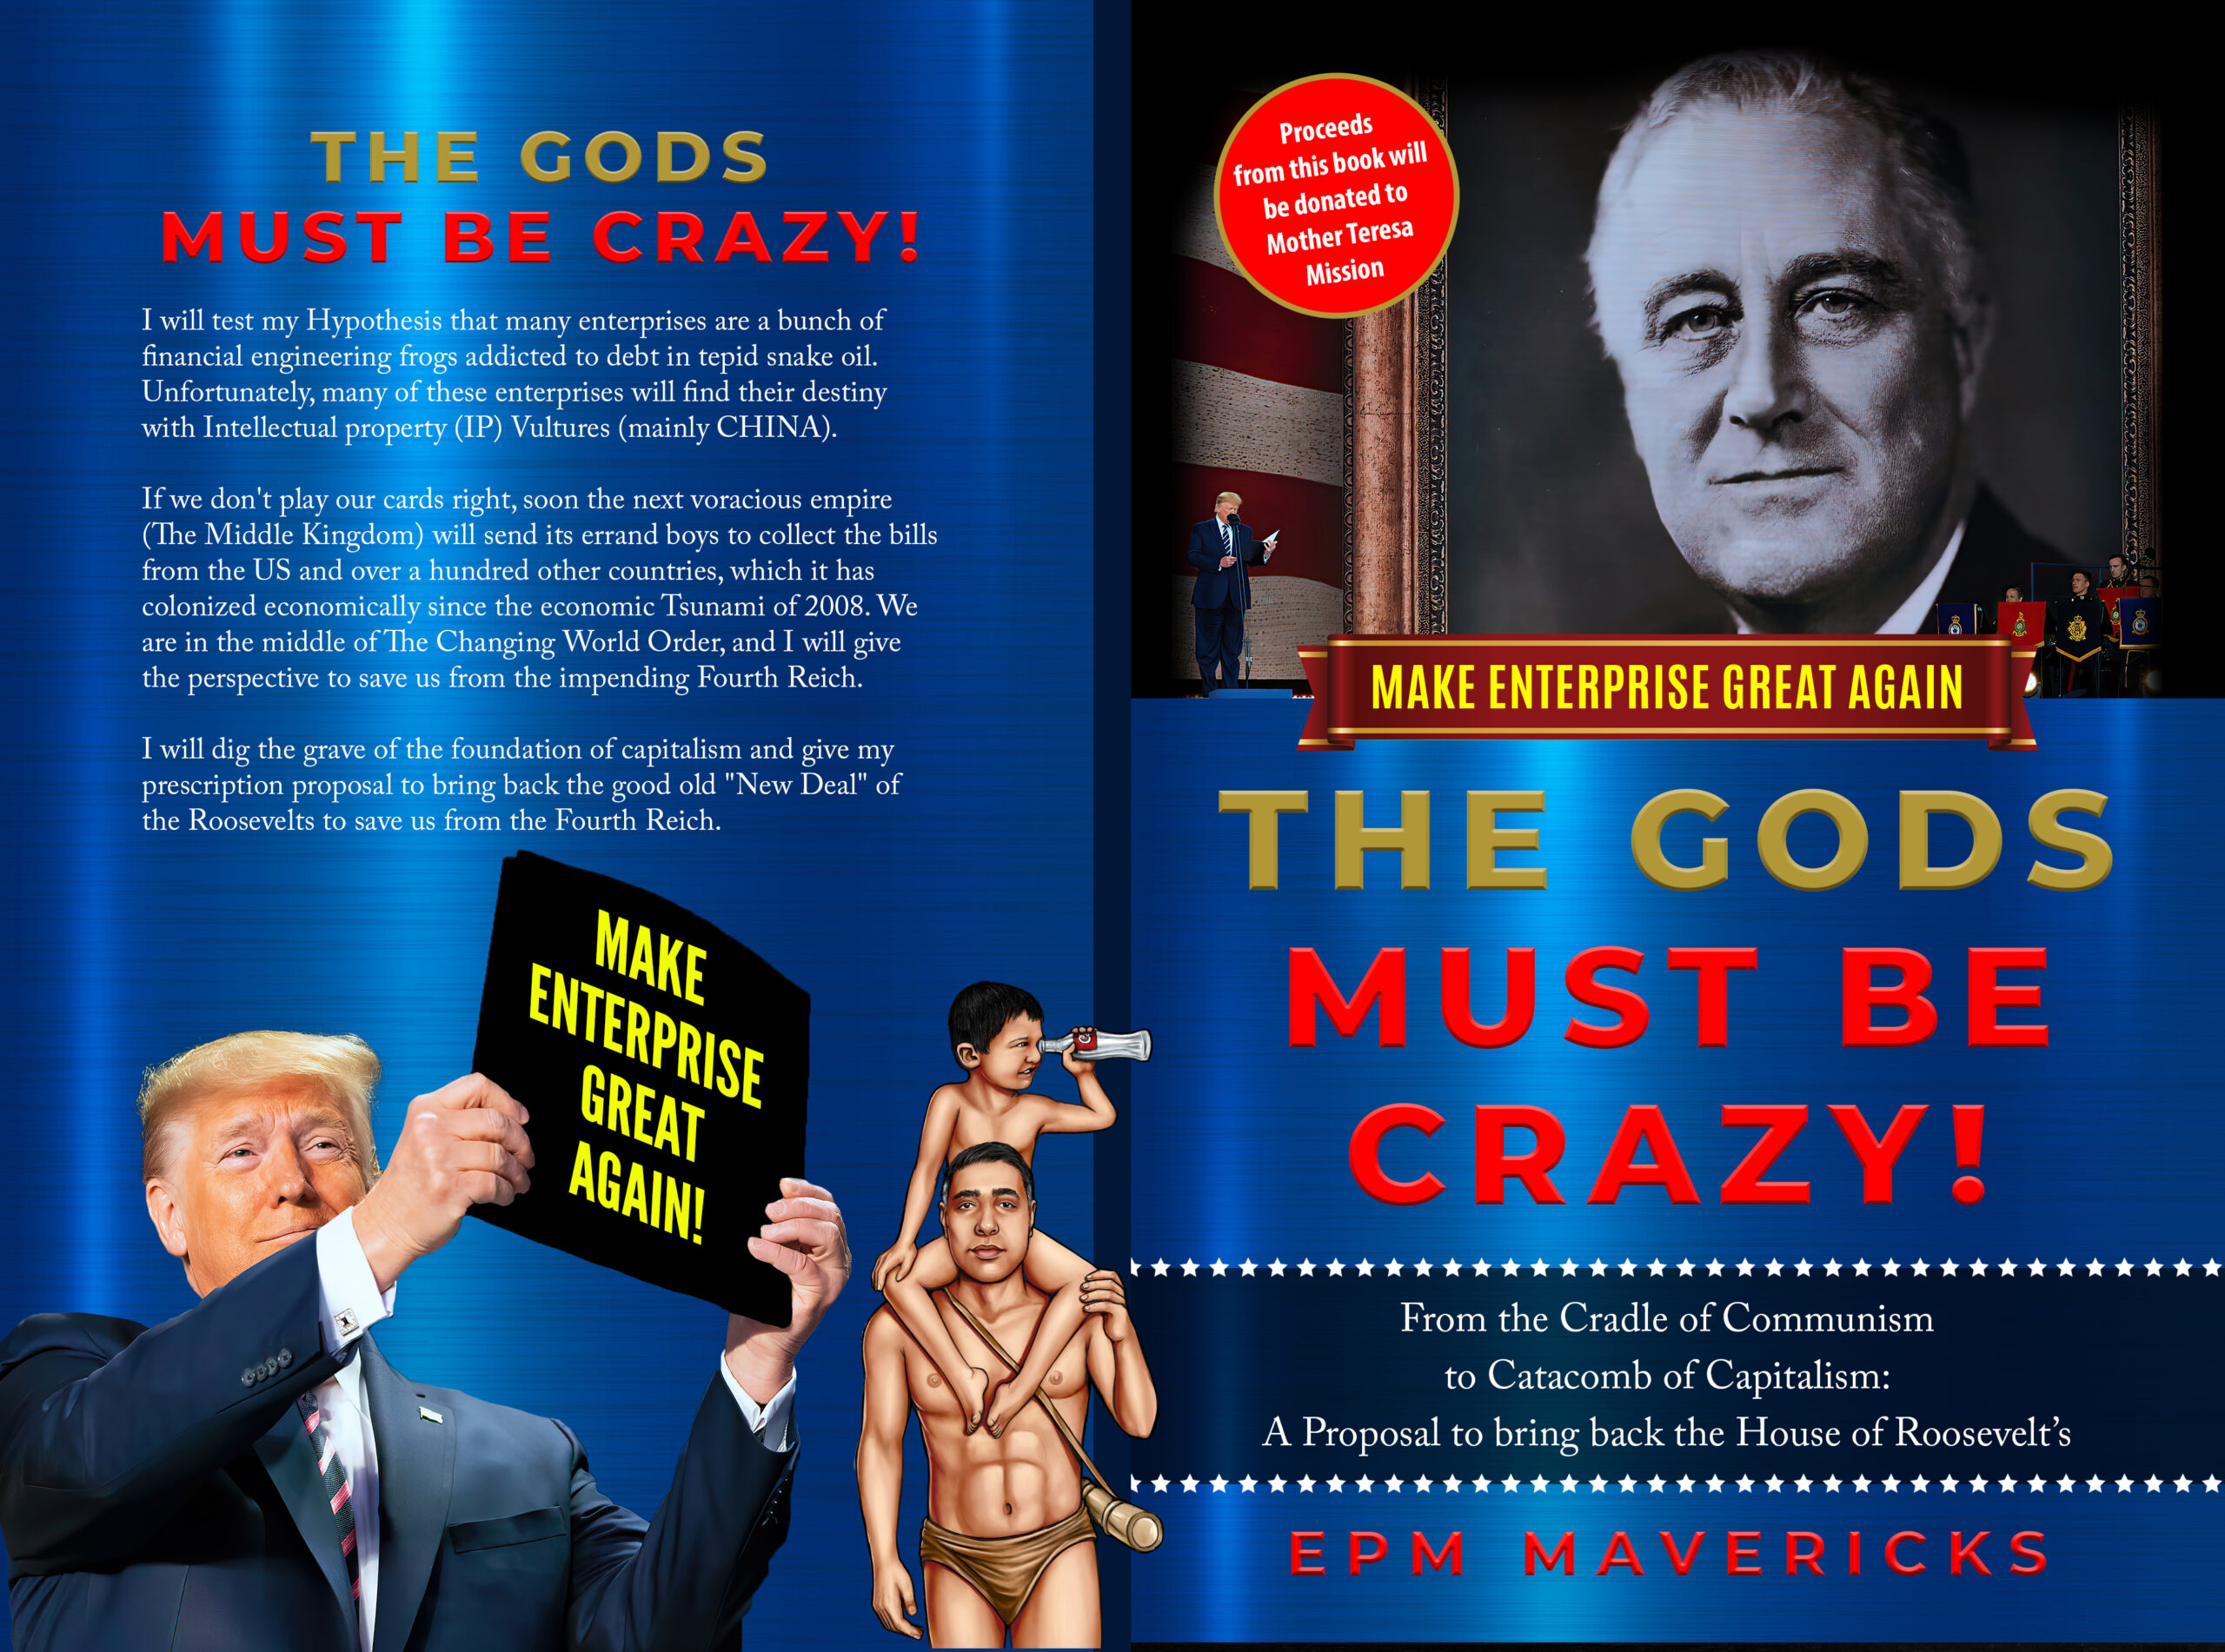 FREE: Make Enterprise Great Again: The Gods Must Be Crazy!: Cradle of Communism to Catacomb of Capitalism: A Proposal to bring back the House of Roosevelt’s by EPM Mavericks